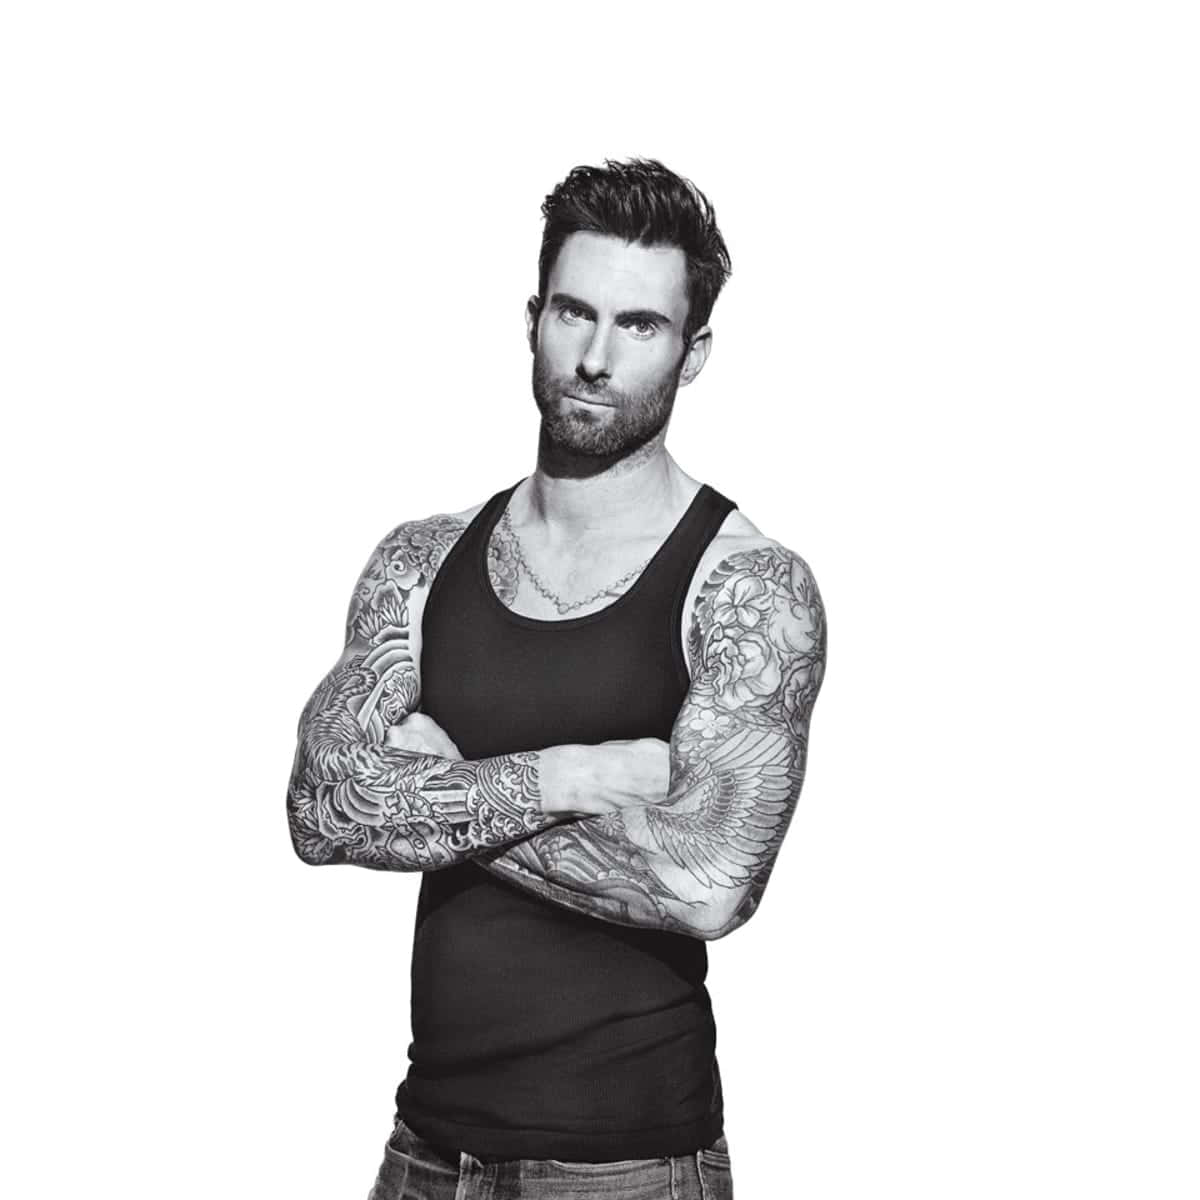 A Man With Tattoos And A Tank Top